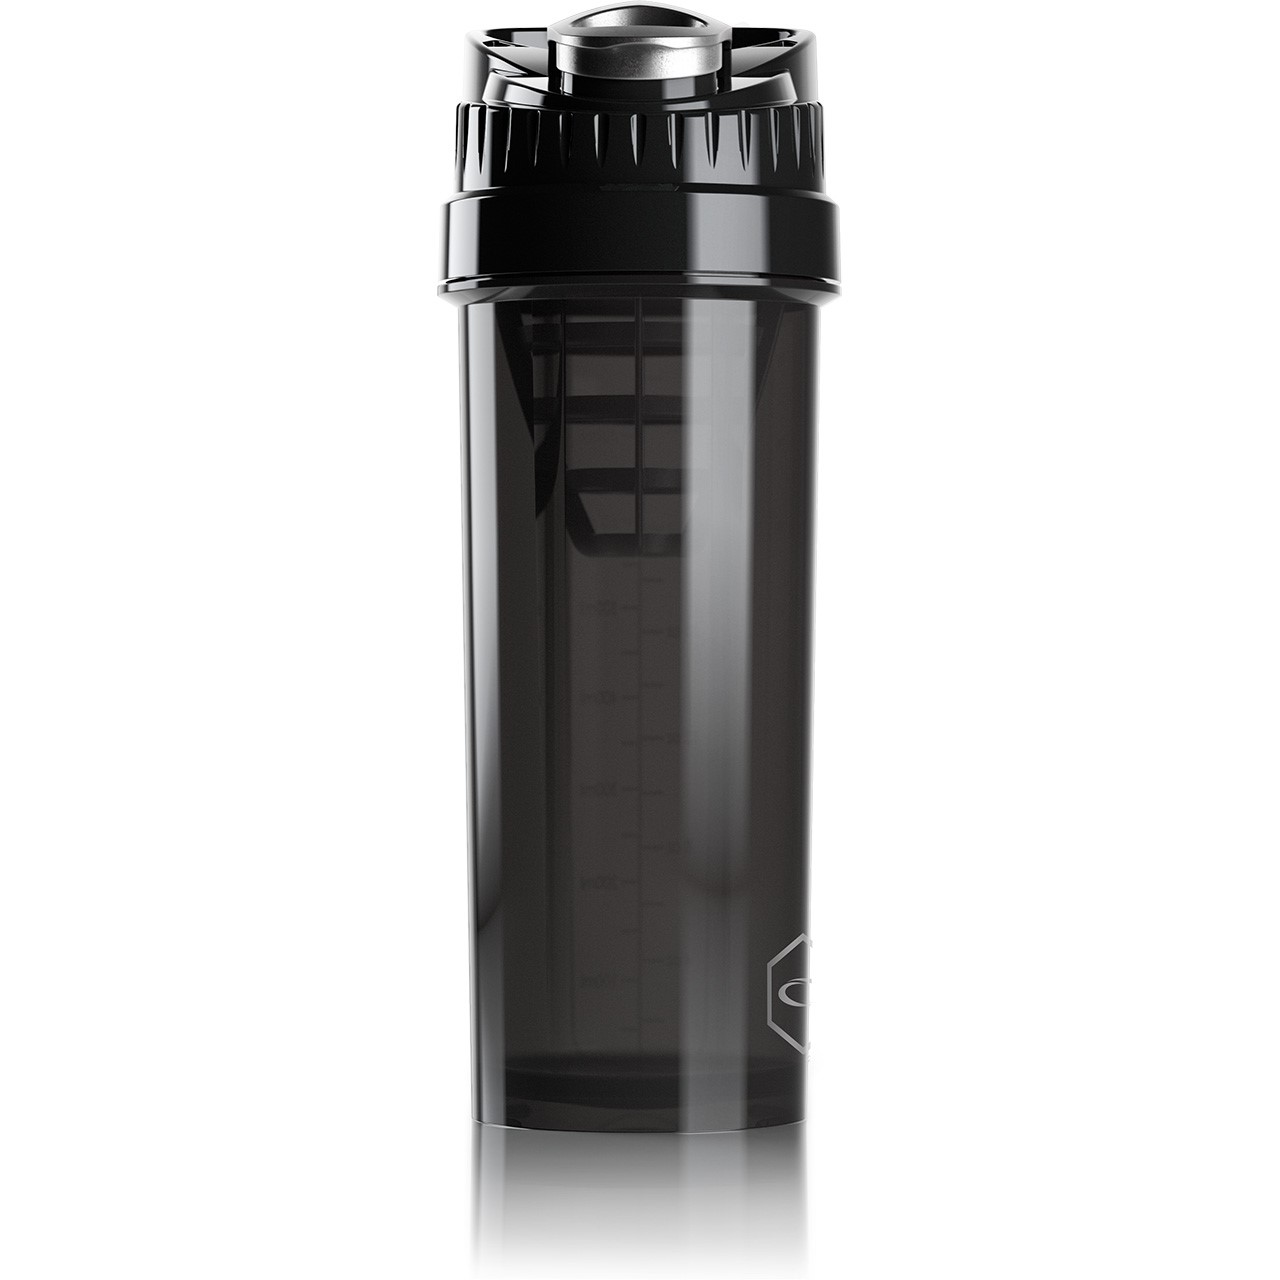 New Protein Shaker Cyclone Cup Black 950 ml